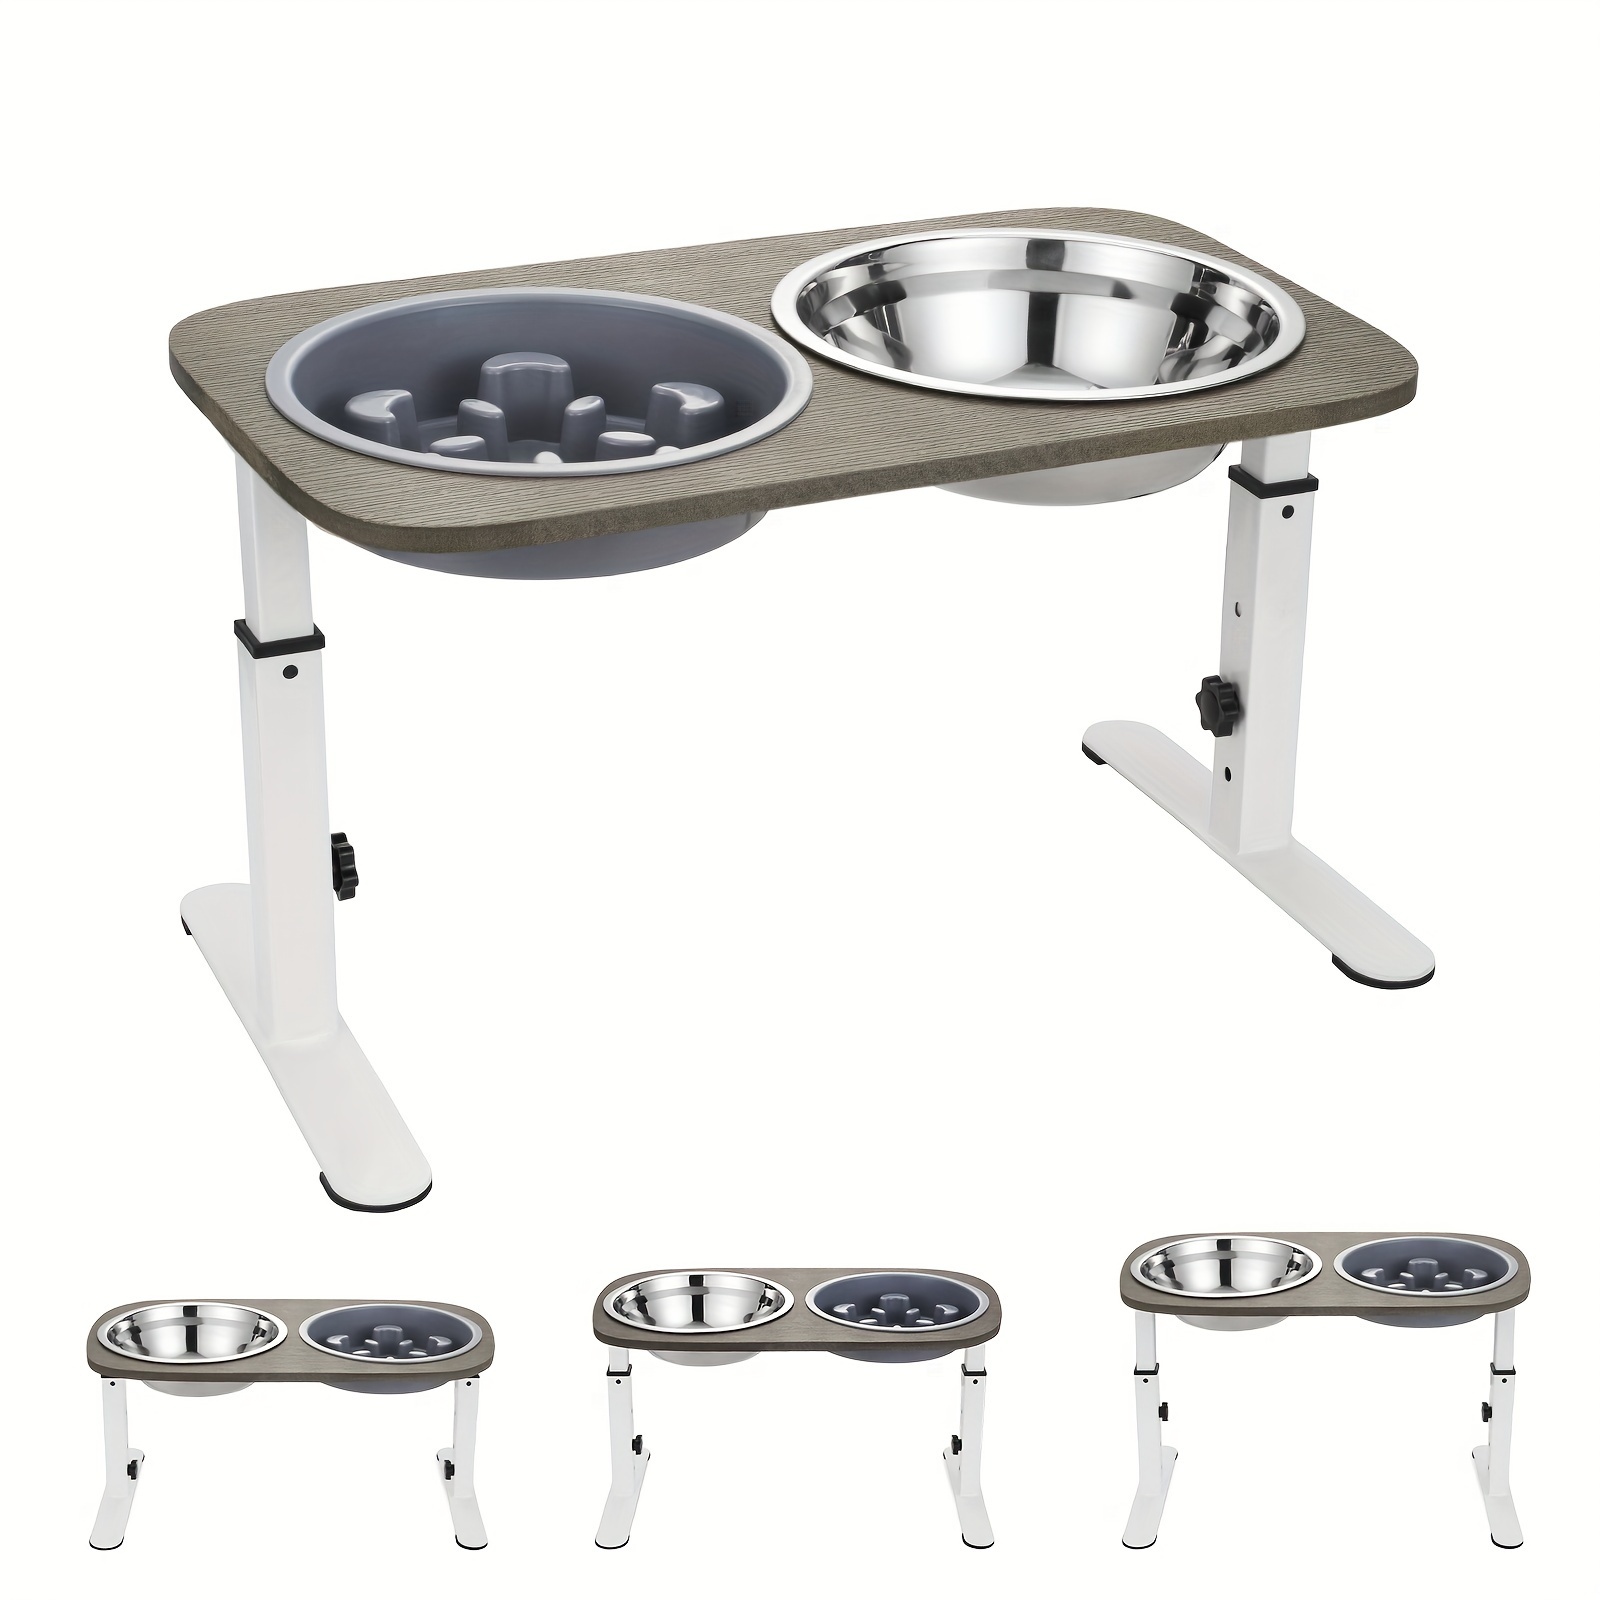 

Veehoo Elevated Dog Bowls - Adjustable Raised Dog Bowl Stand With Slow Feeder Dog Bowl & 2 Stainless Steel Food Bowls, Wood Dog Feeding Station With Metal Stand For Large Medium Small Dogs